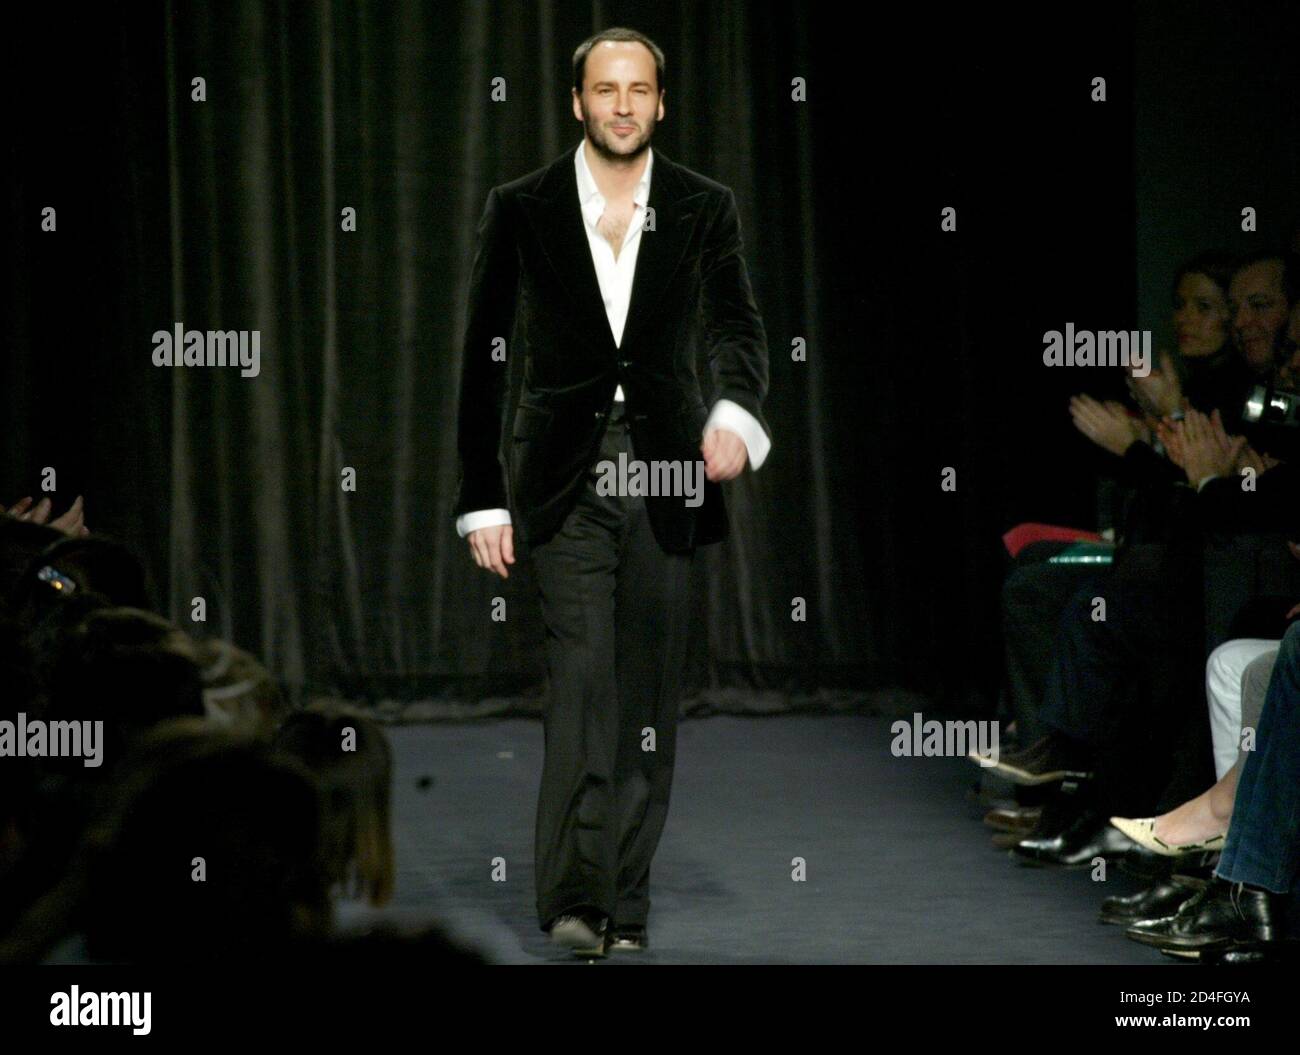 American designer Tom Ford for fashion house Yves Saint-Laurent Rive Gauche  walks on the catwalk after his show for Autumn/Winter 2003-04 ready-to-wear  collection in Paris March 10, 2003. The Paris fashion shows